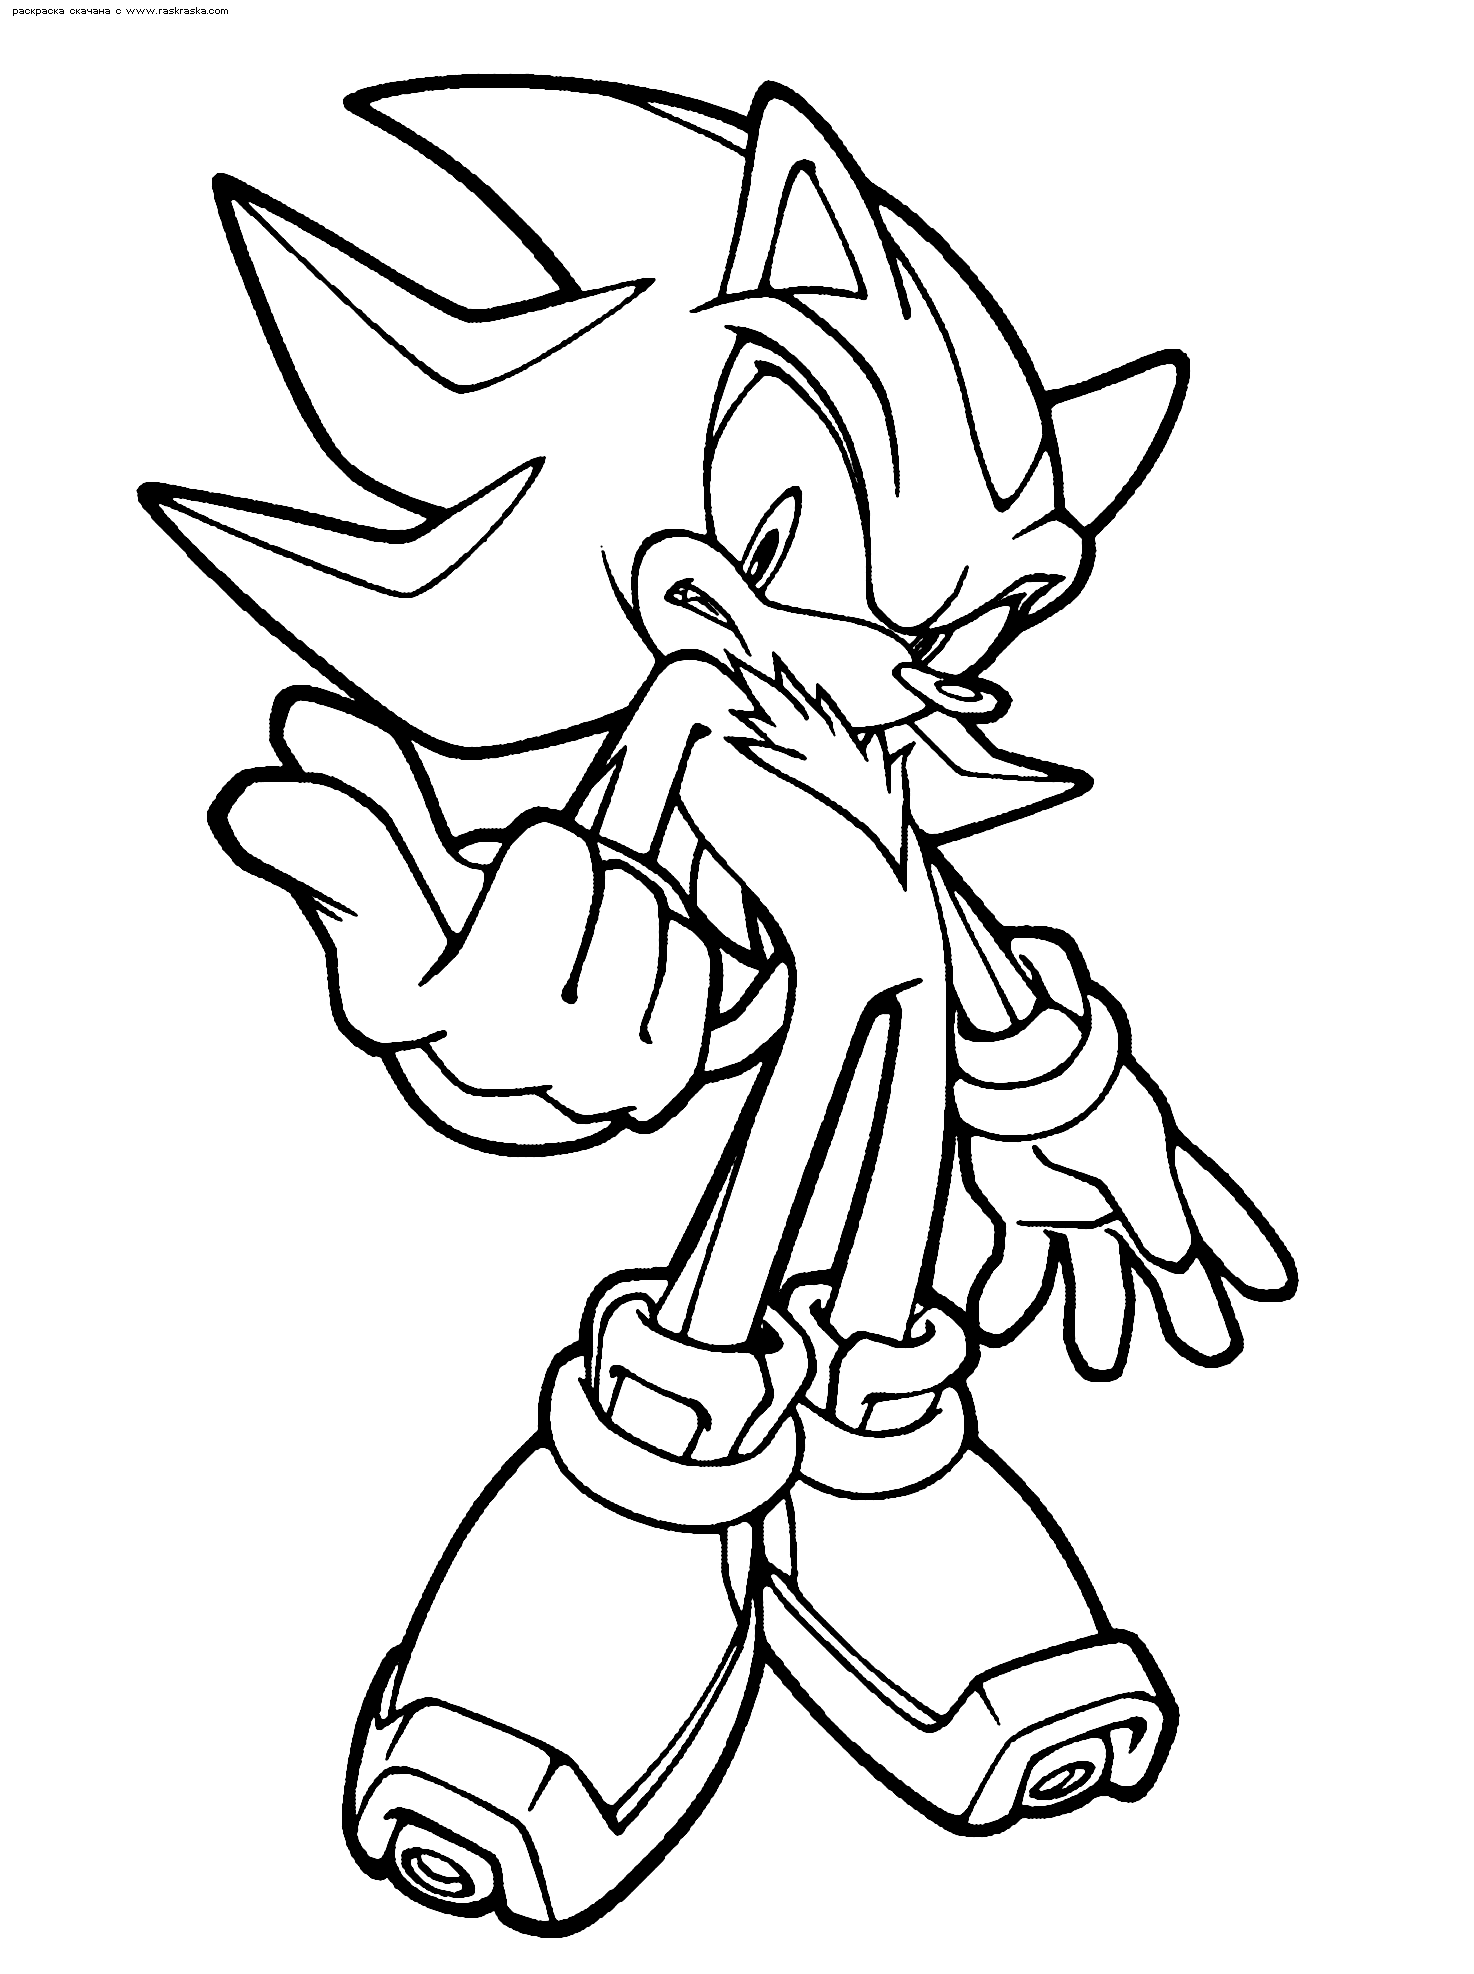 sonic color page - High Quality Coloring Pages